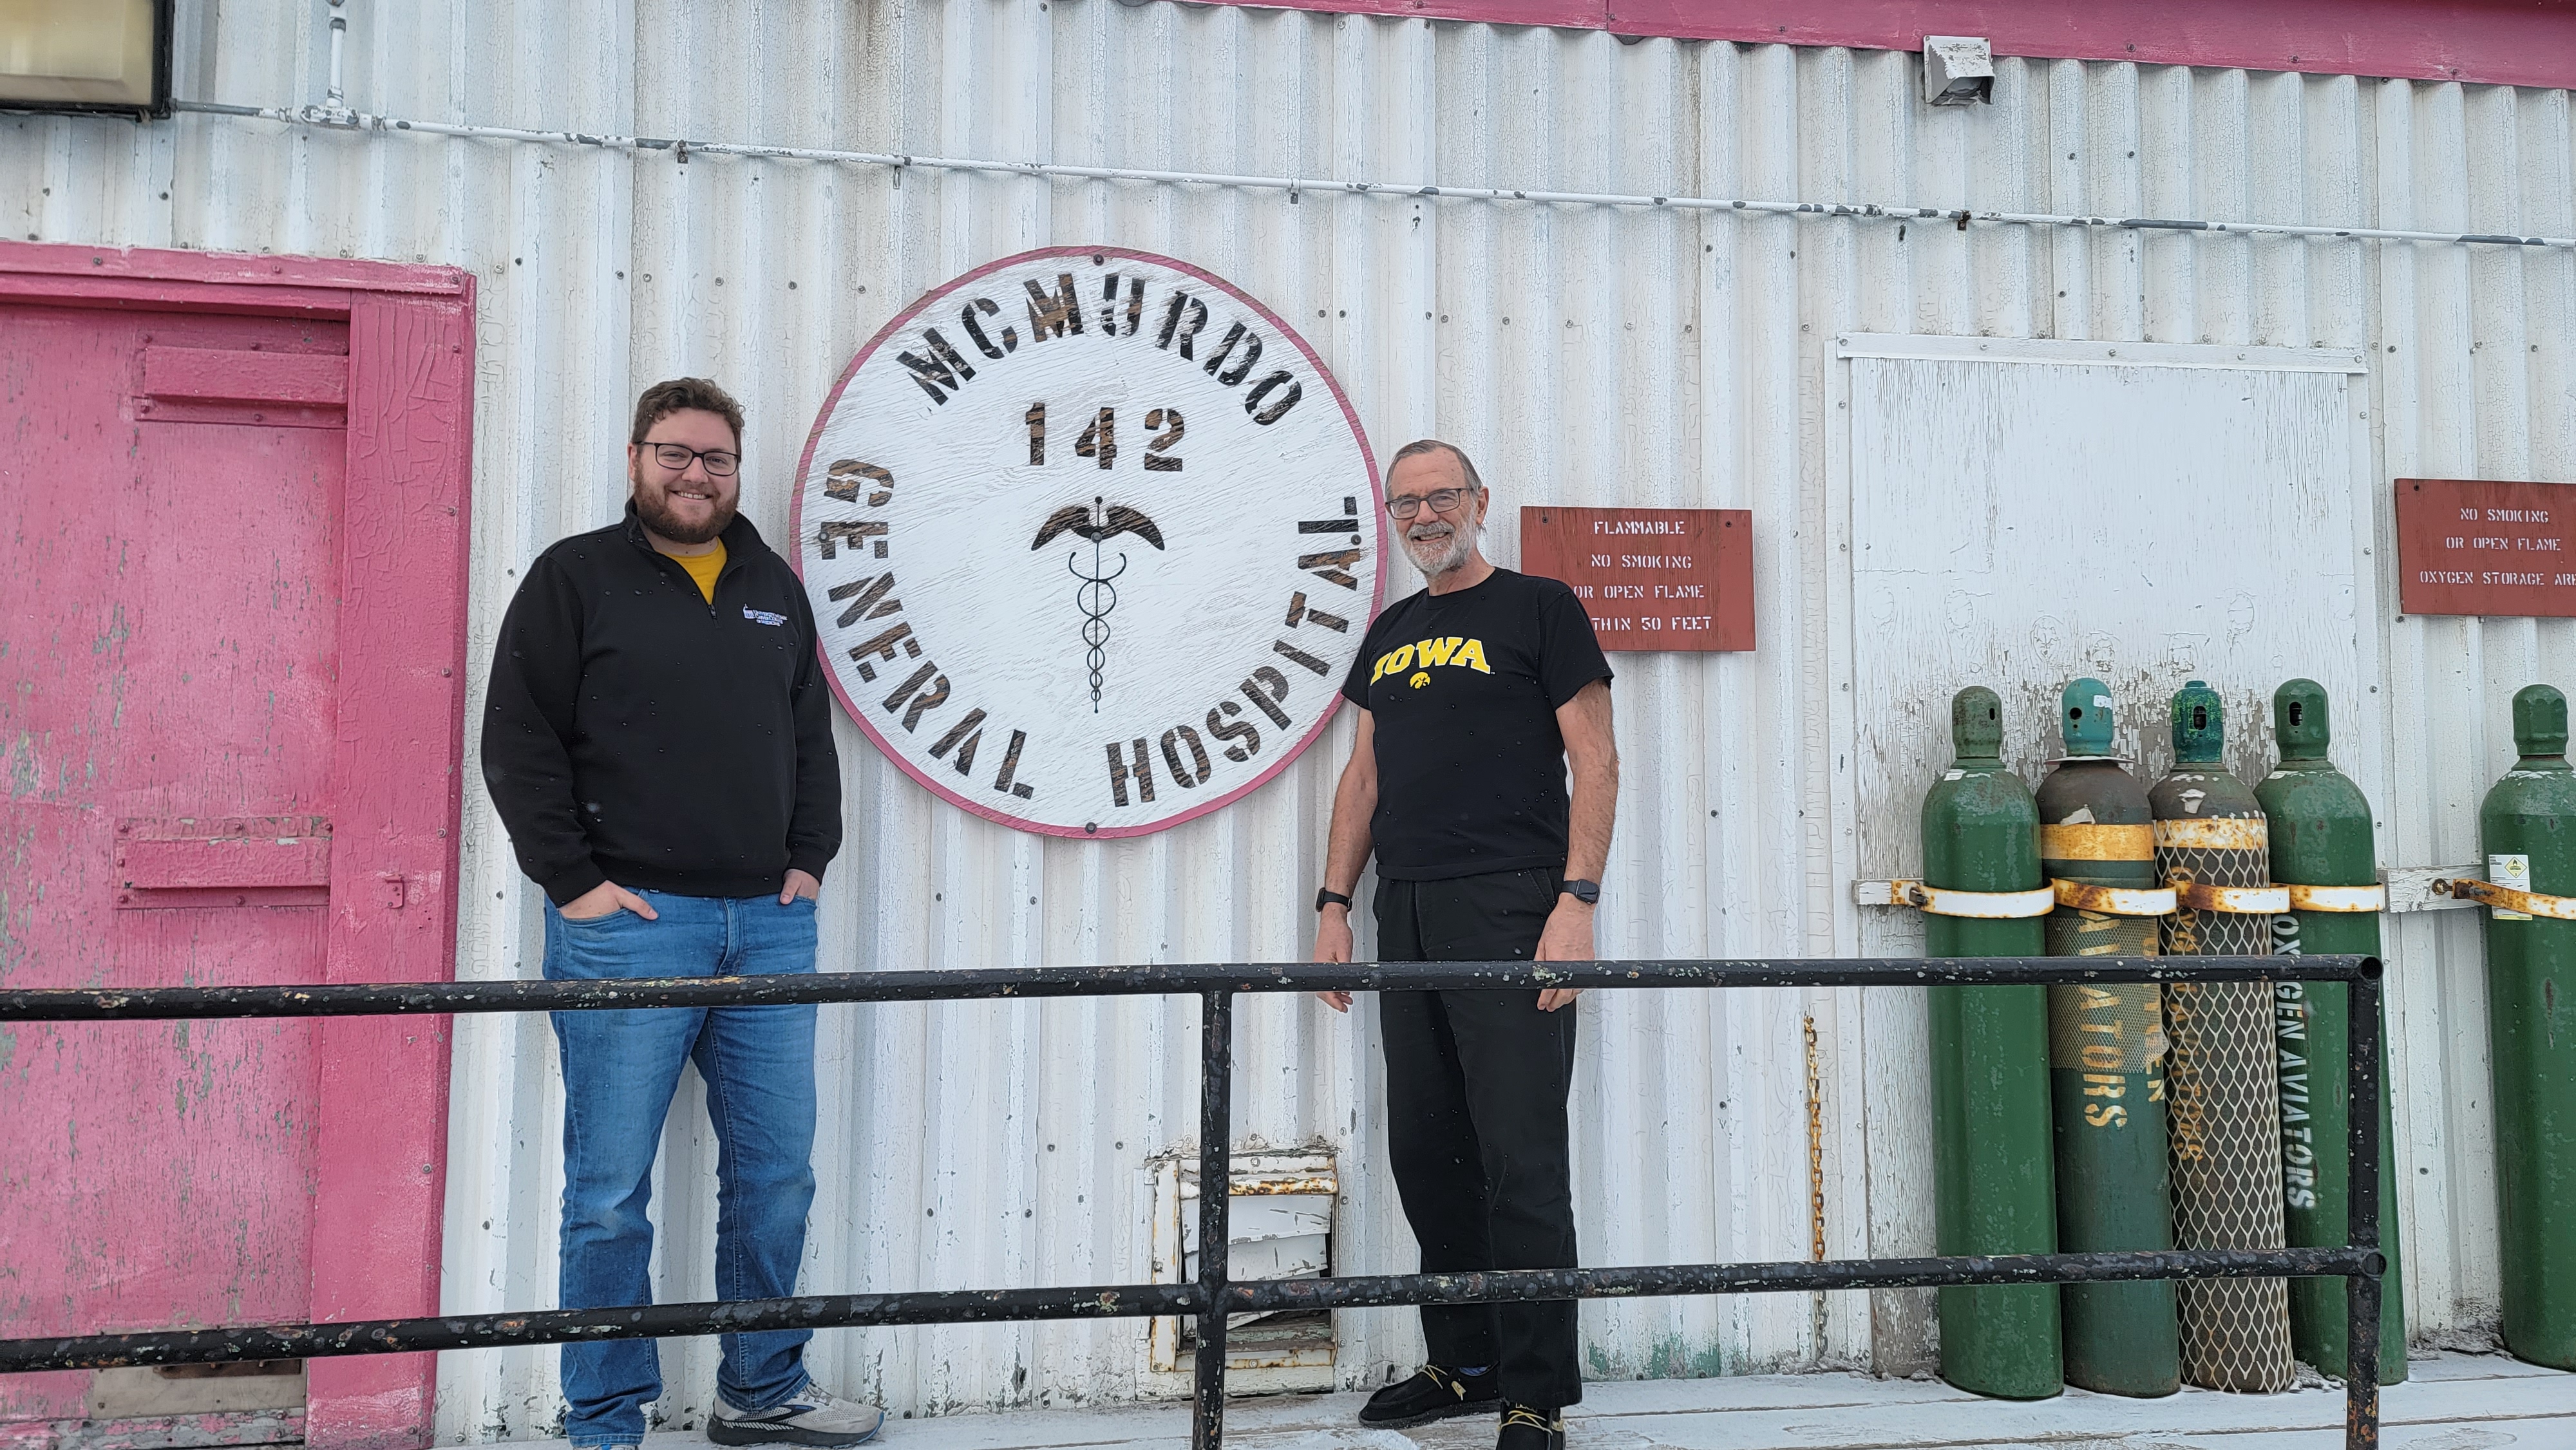 Isaiah Reeves (20MD) and Jon Ahrendsen (82MD) are Iowa alumns who were  both were coincidentally stationed to serve the community of research scientists and support staff who come to McMurdo from across the globe.